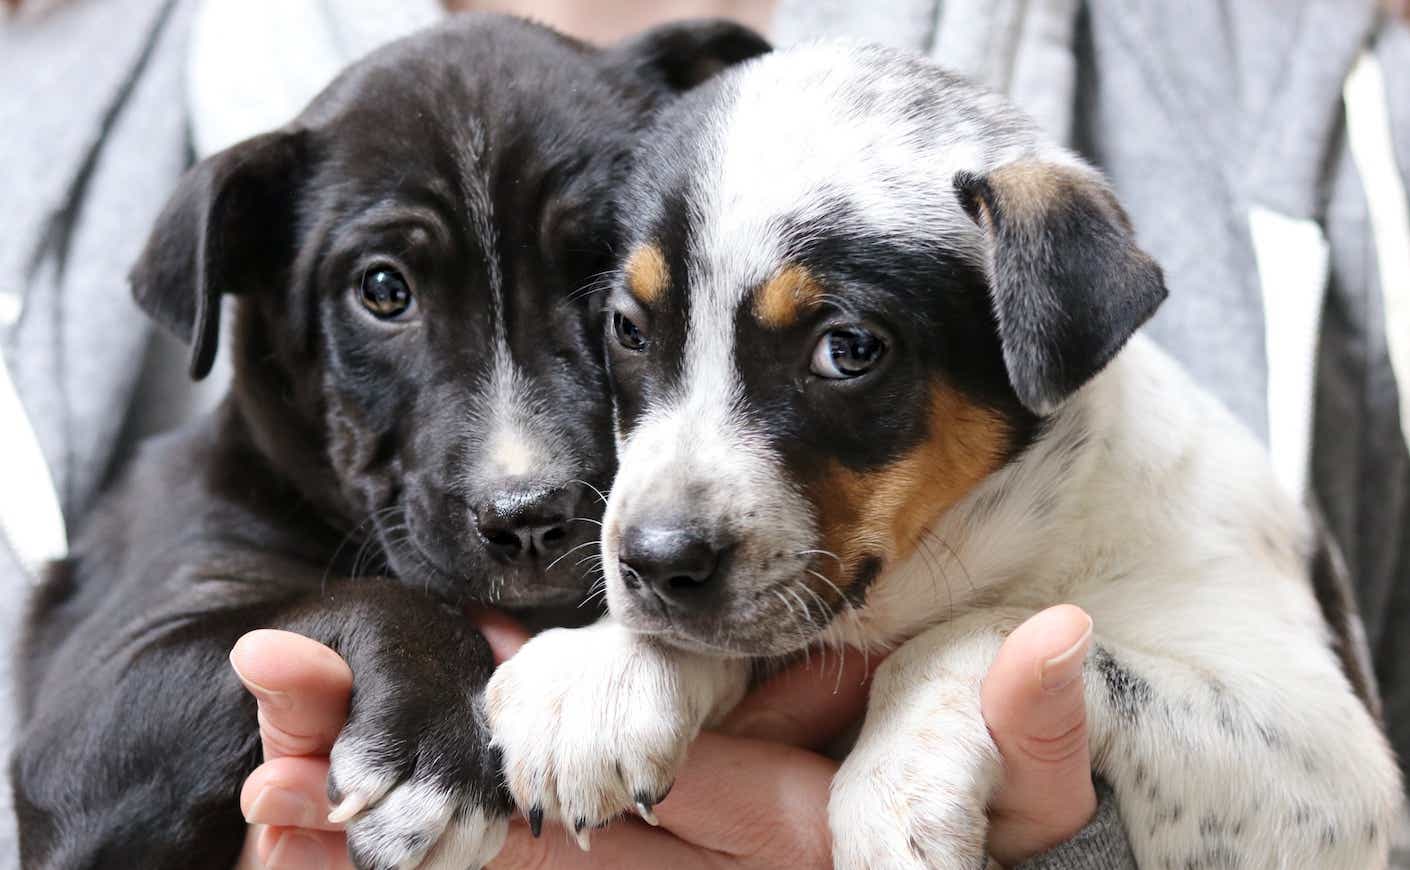 Two adorable puppies